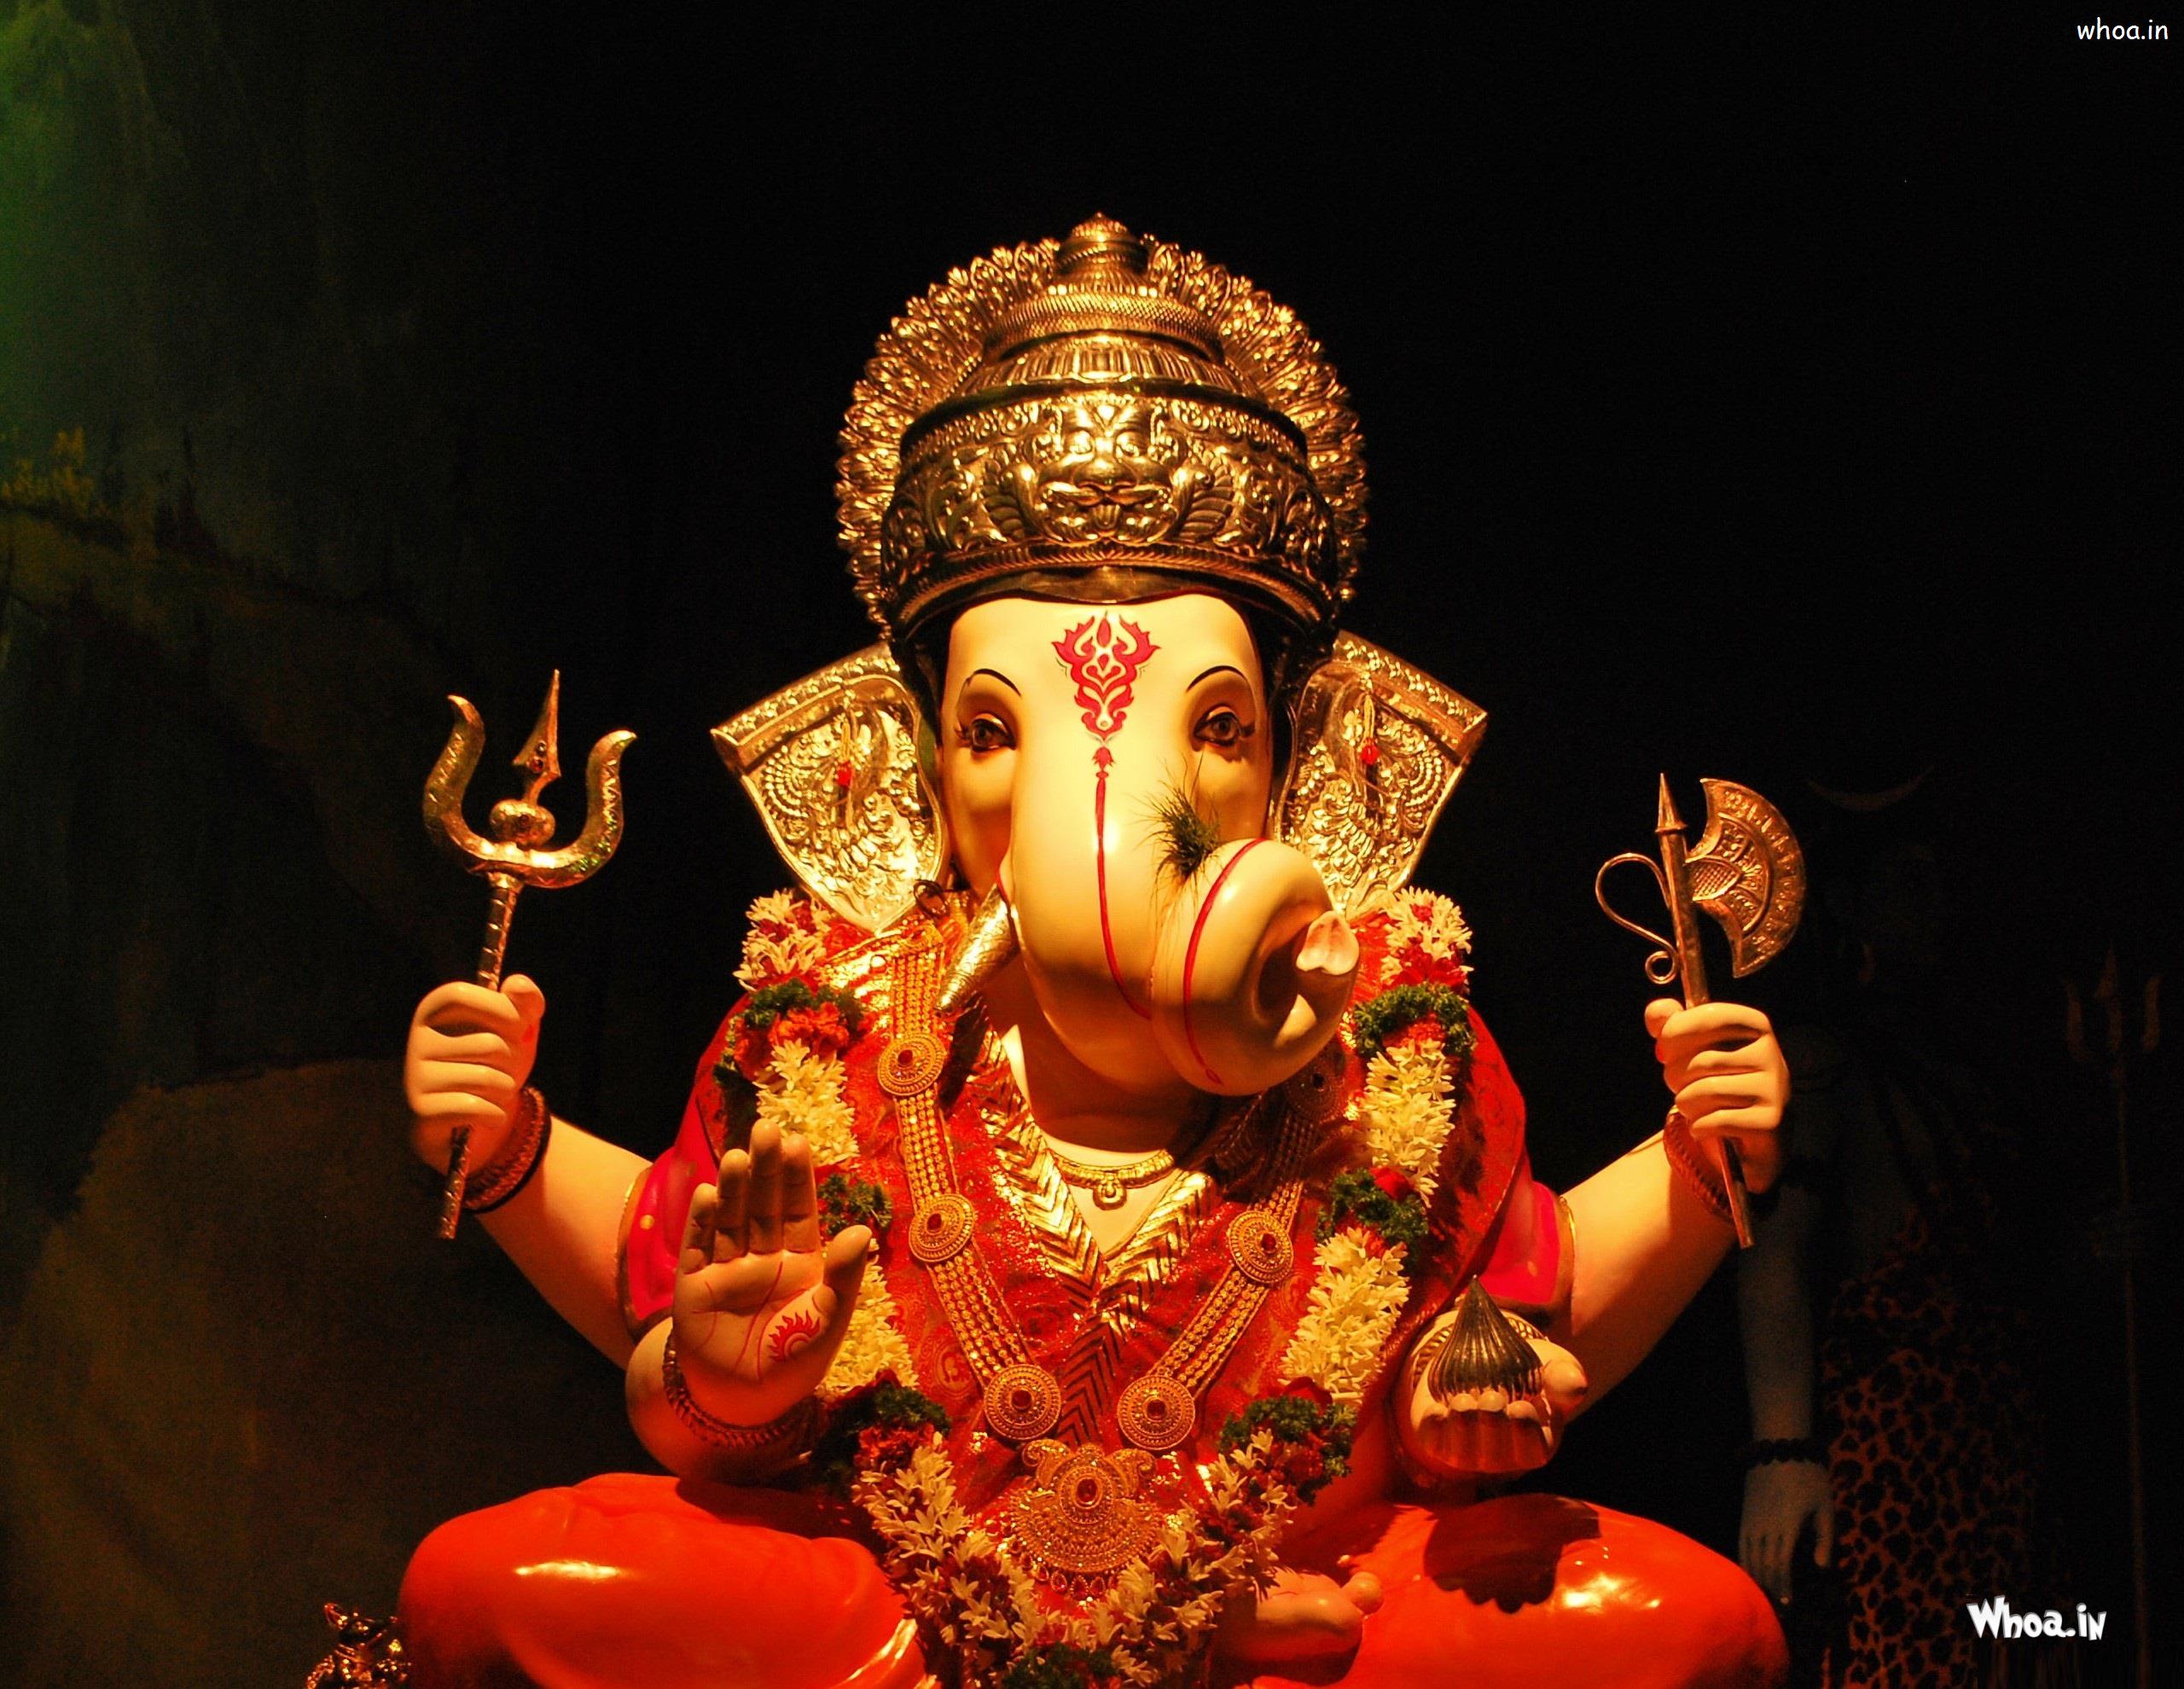 Wallpaper Hd Download For Android Mobile Ganesh